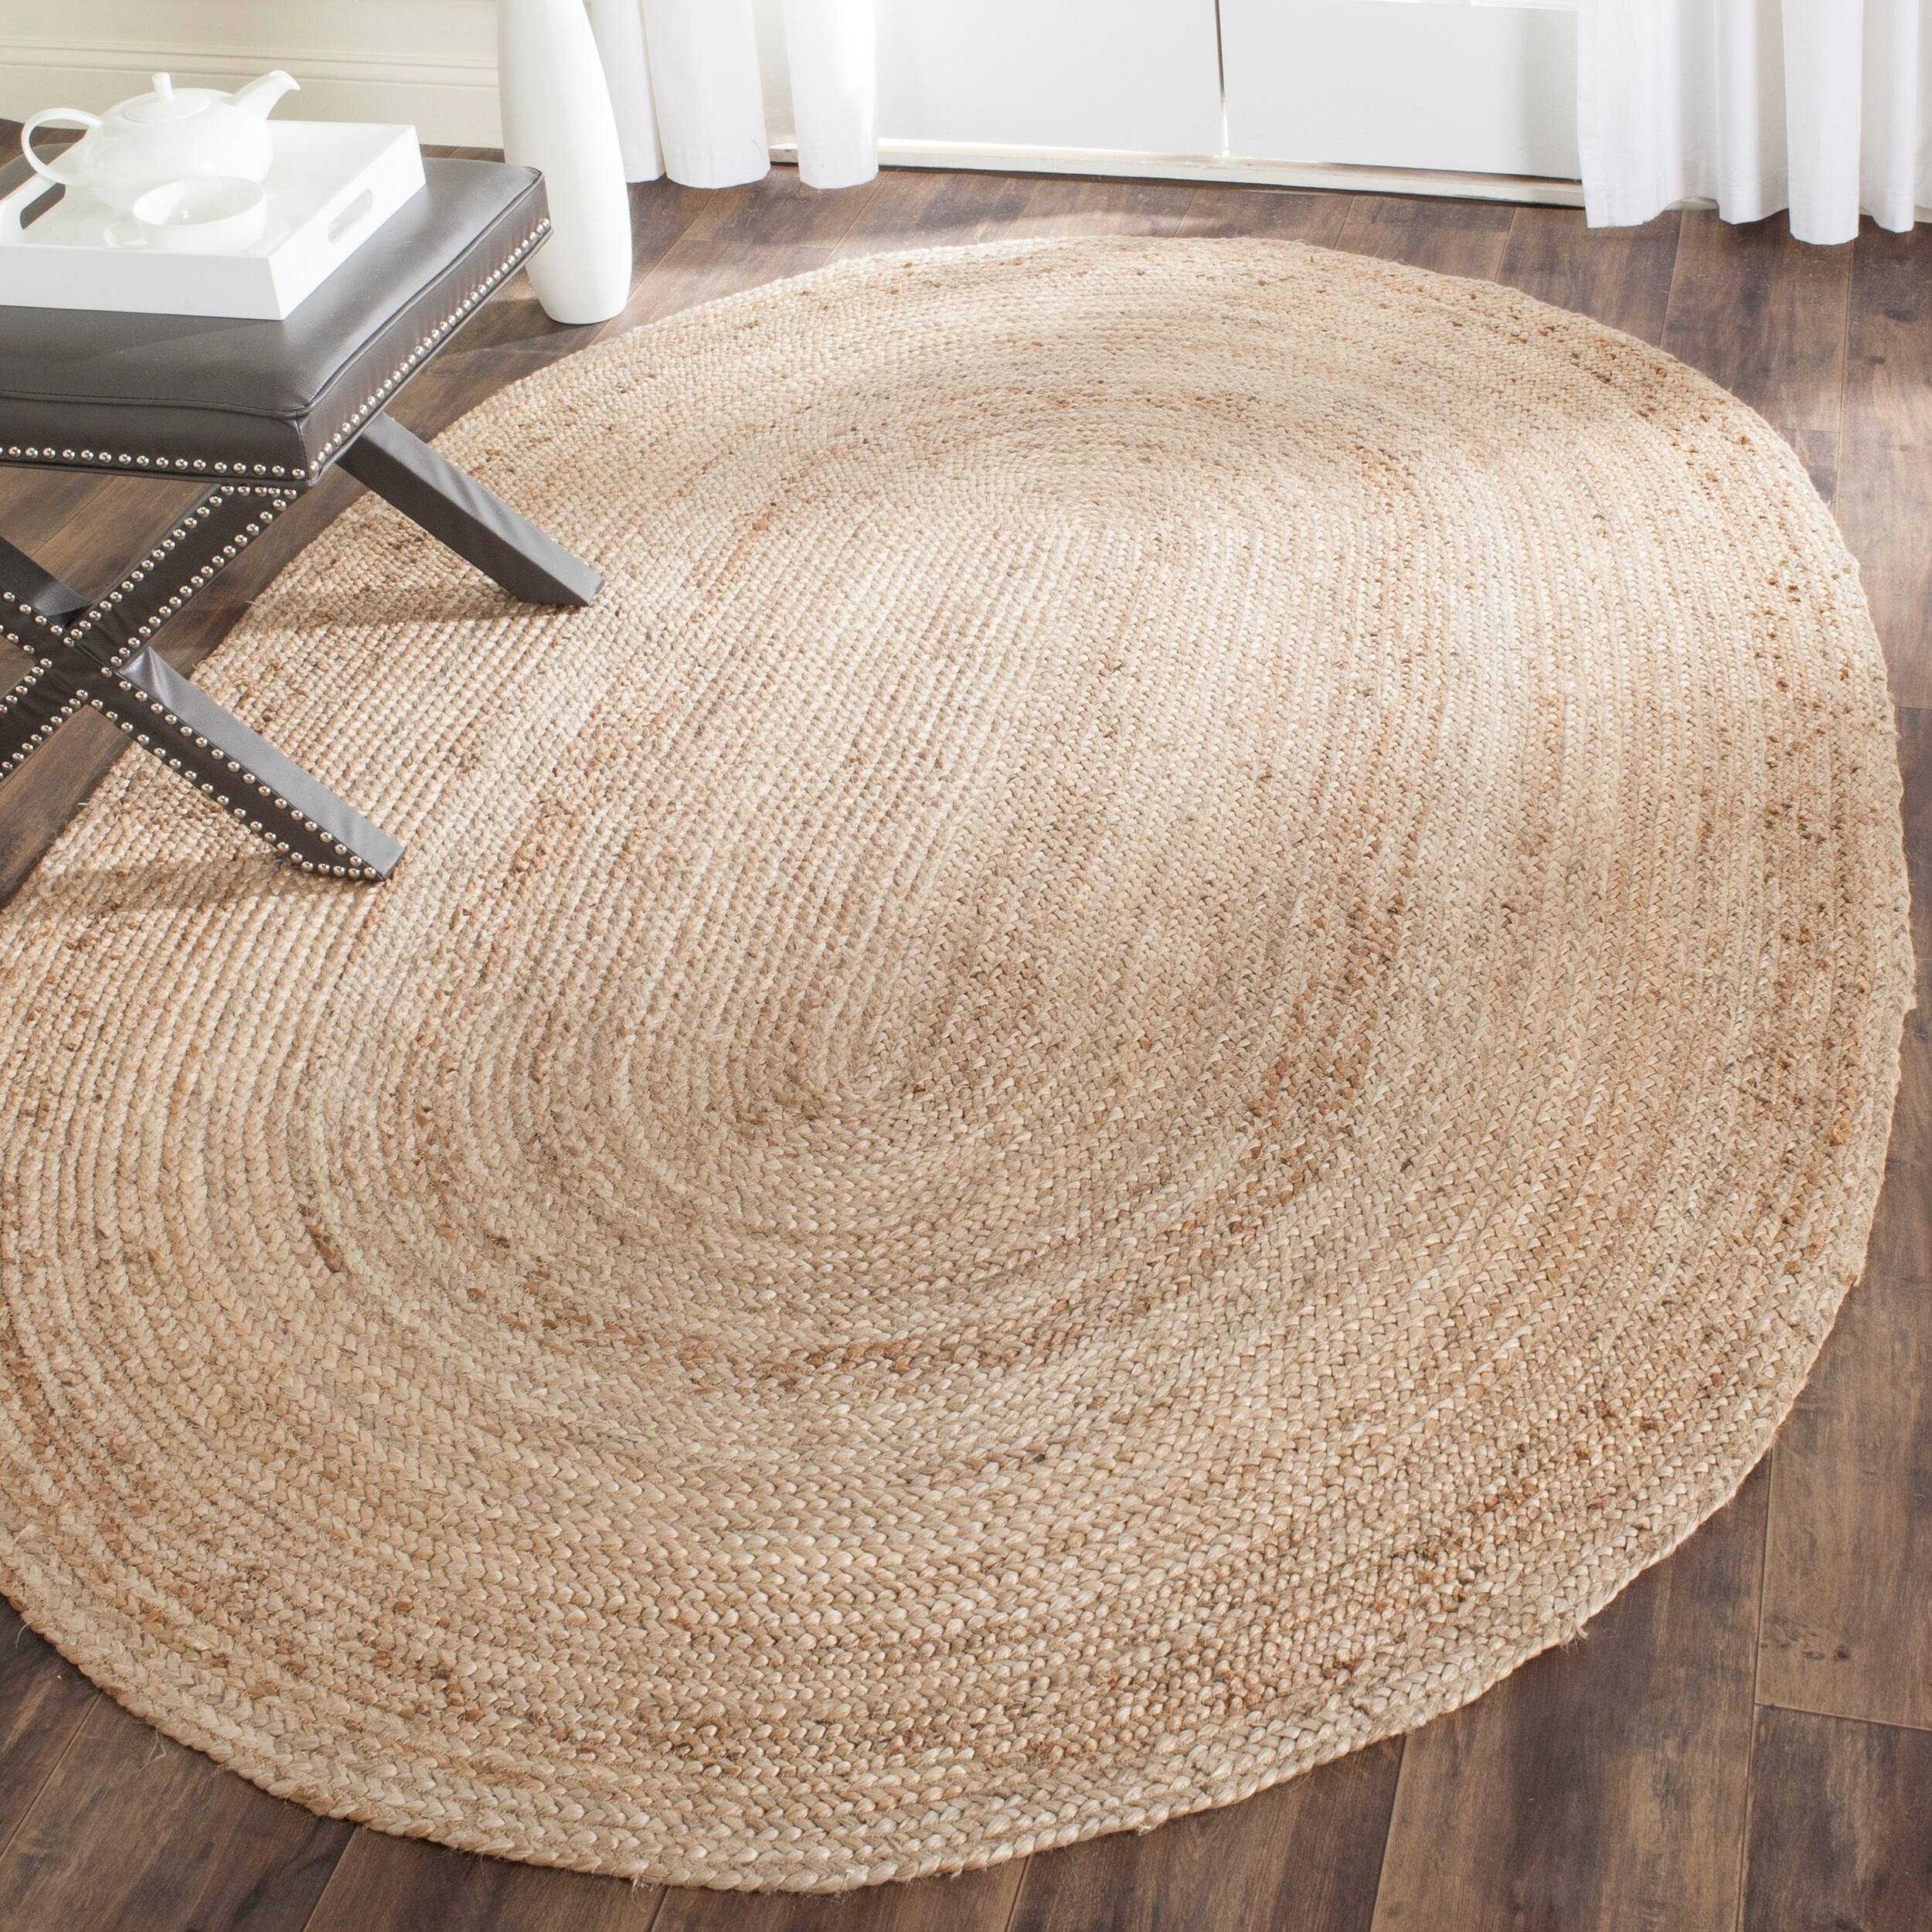 Buy Round, Oval & Square Area Rugs Online at Overstock.com | Our Best ...